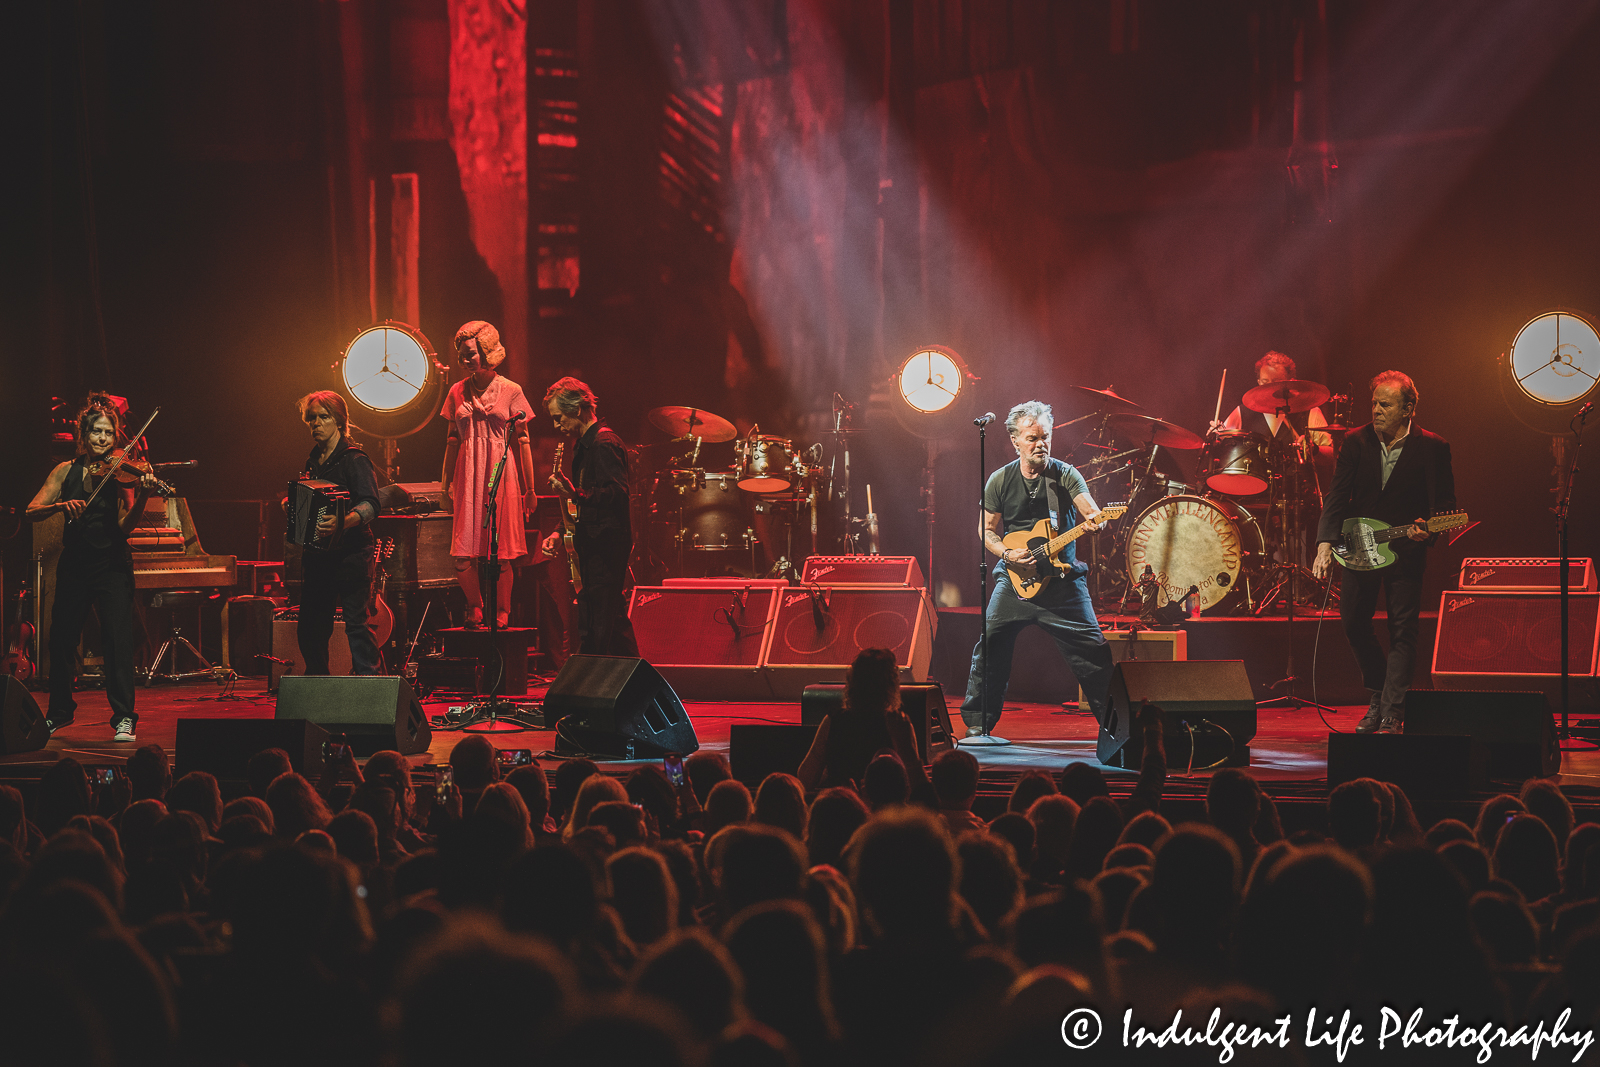 John Mellencamp performing "Paper in Fire" with violinist Lisa Germano, accordian player Troye Kinnett, guitarist Andy York, drummer Dane Clark and guitarist Mike Wanchic at The Midland Theatre in downtown Kansas City, MO on April 4, 2023.